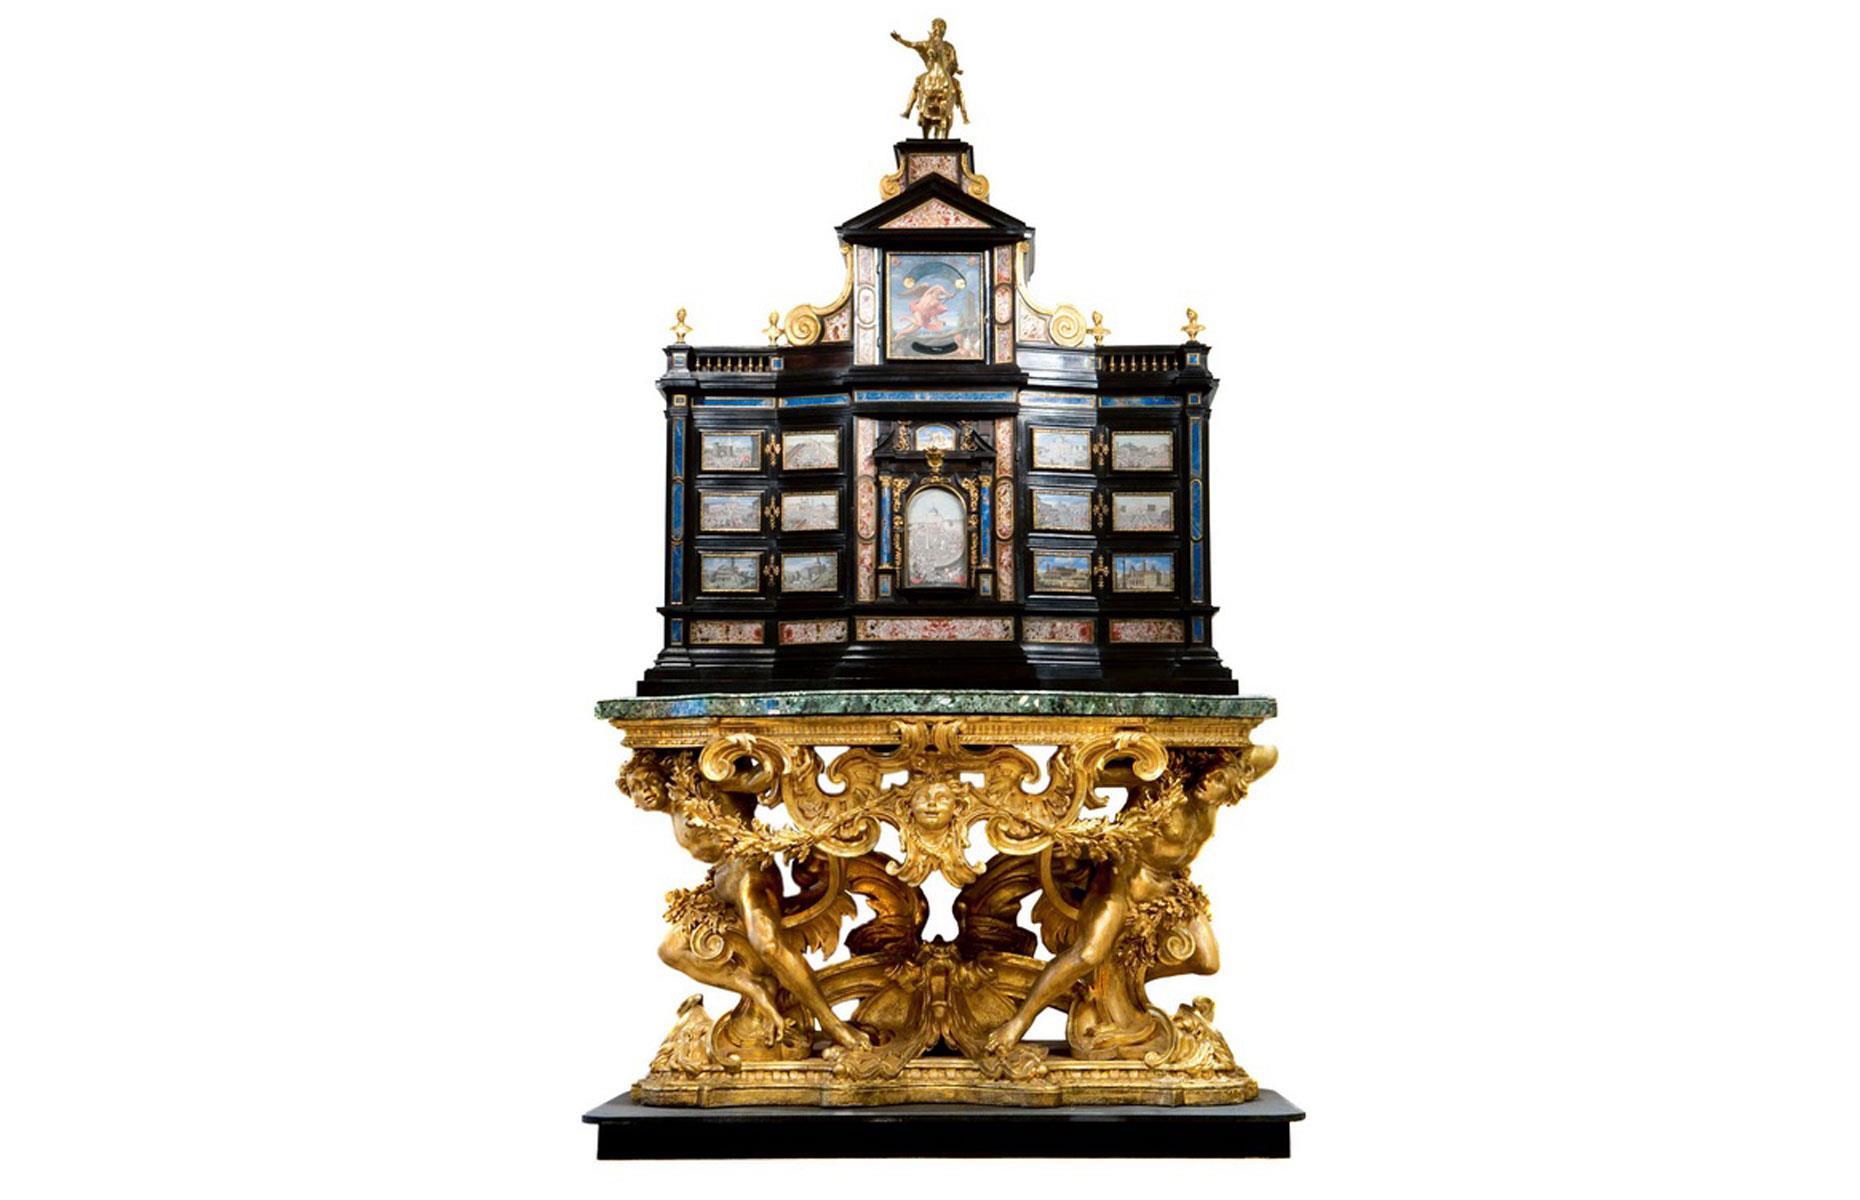 The missing antique cabinet gracing a pizza joint: $1.8 million (£1.5m)